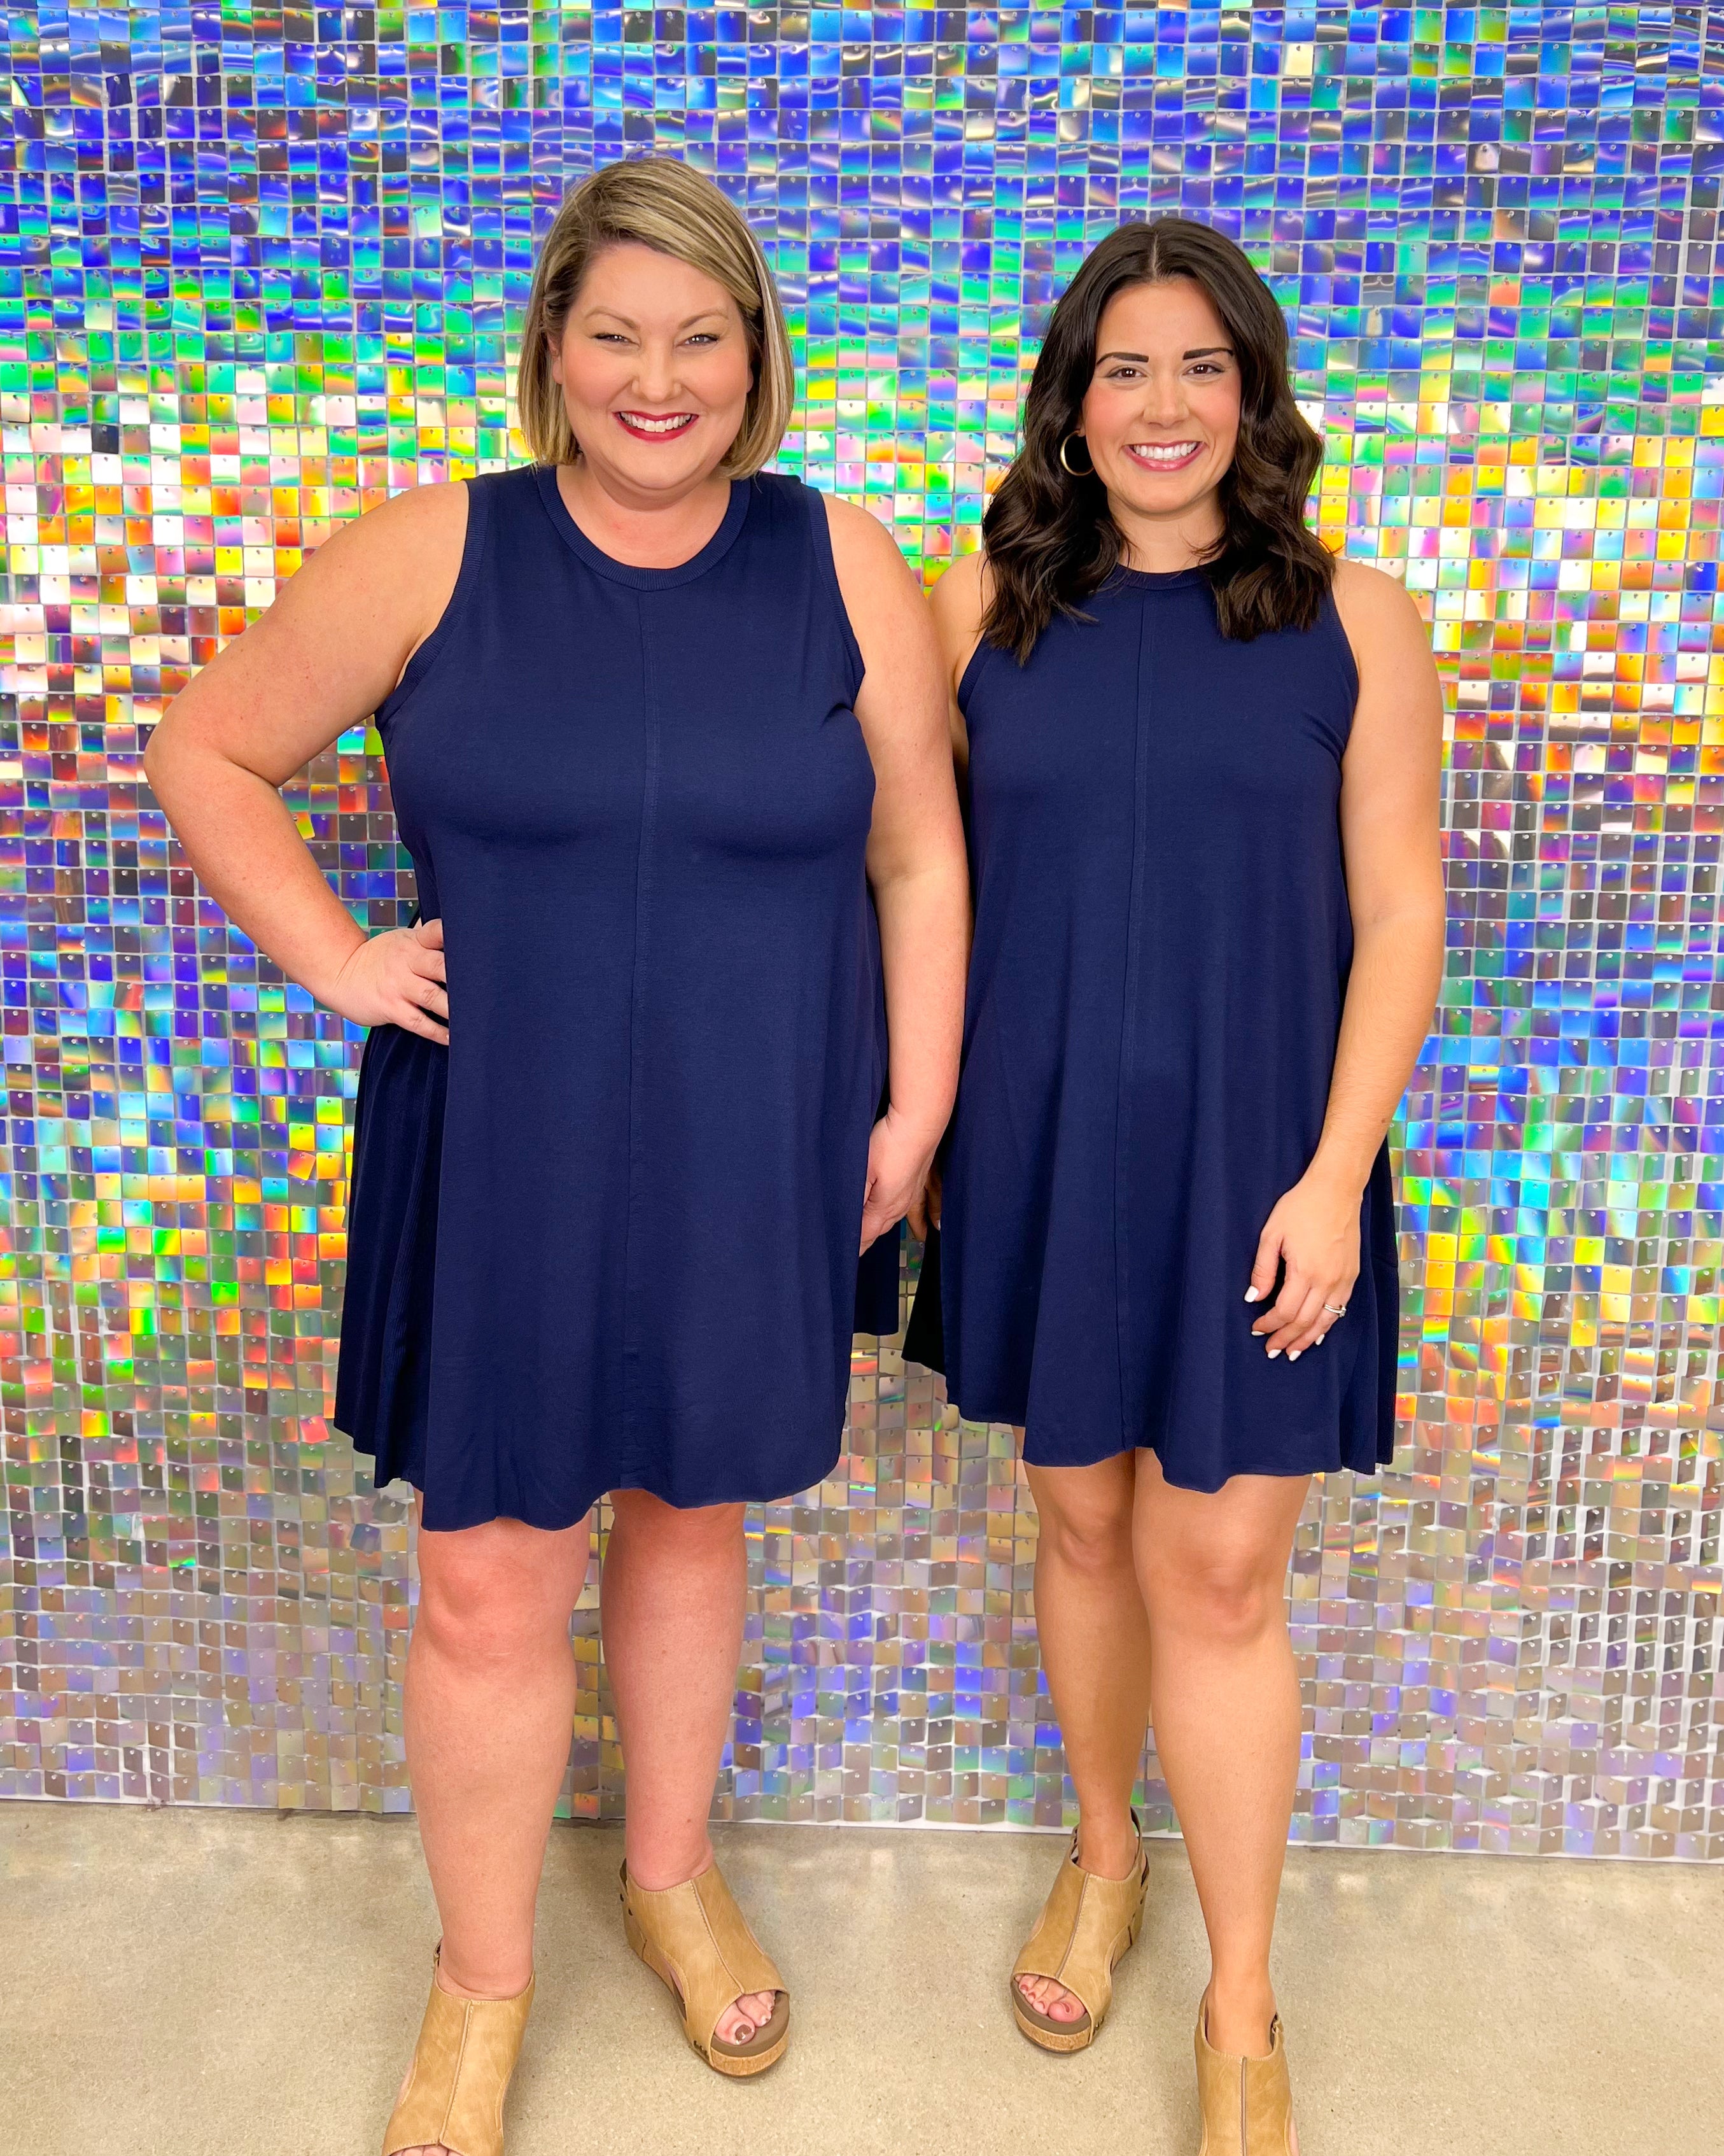 Mud Pie Inman Ribbed Dress - Navy, sleeveless, exposed seam on front, round neck, flowy, plus size